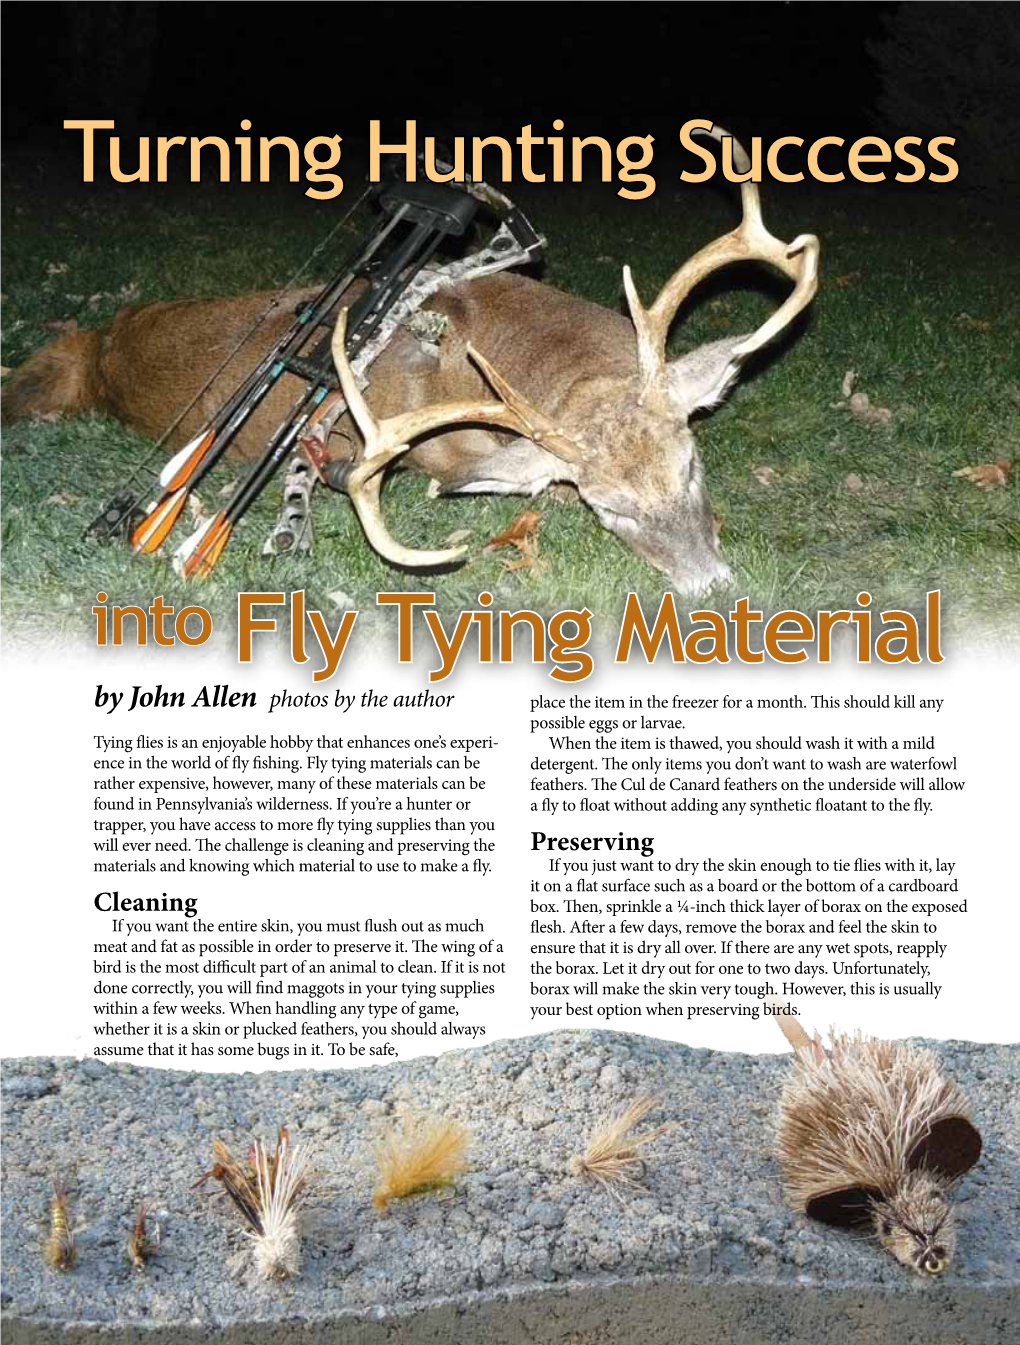 Turning Hunting Success Into Fly Tying Material